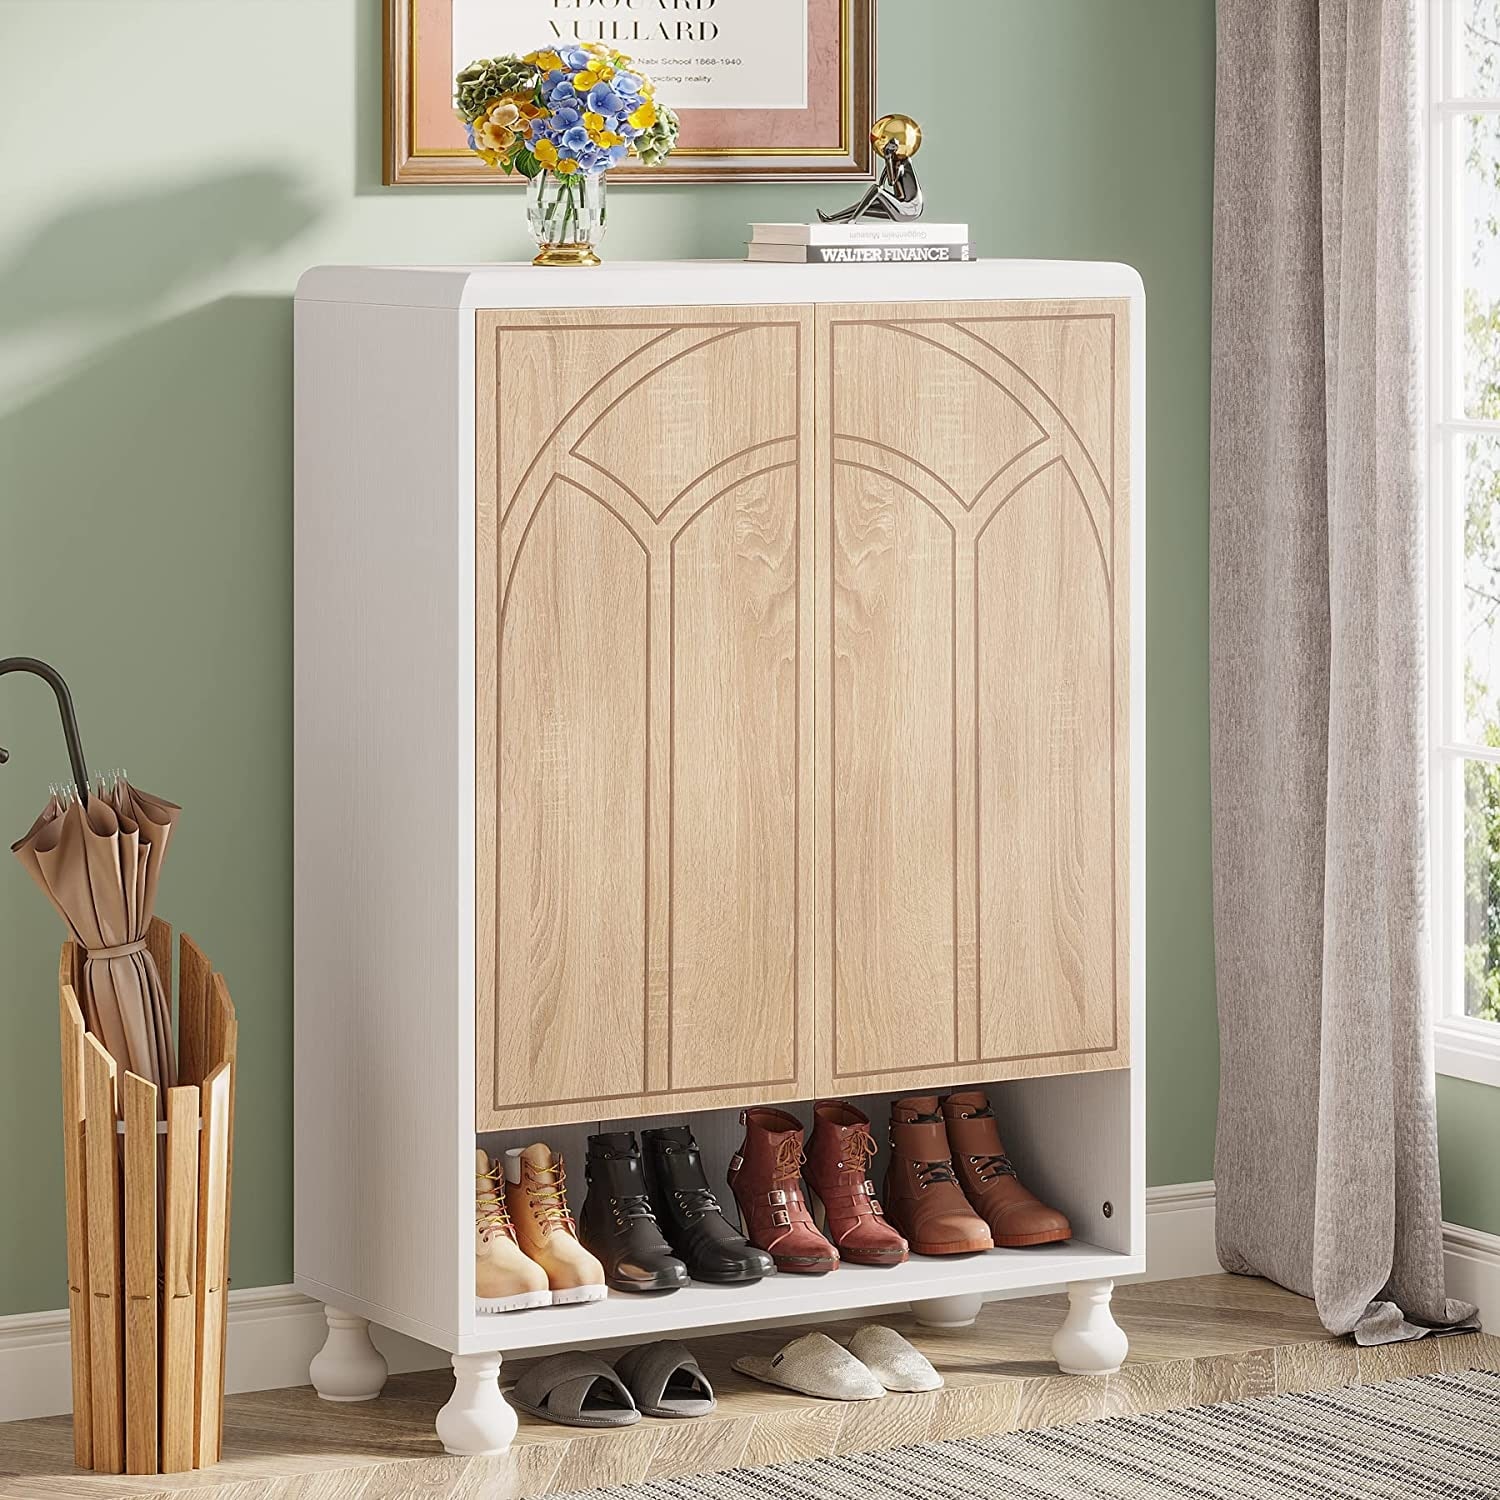 https://ak1.ostkcdn.com/images/products/is/images/direct/9eddfcfd02ac07d237854296c5a8bd529229e76c/6-tier-Shoe-Storage-Cabinet%2C-18-Pairs-Shoe-Organizer-Cabinet-with-Door.jpg